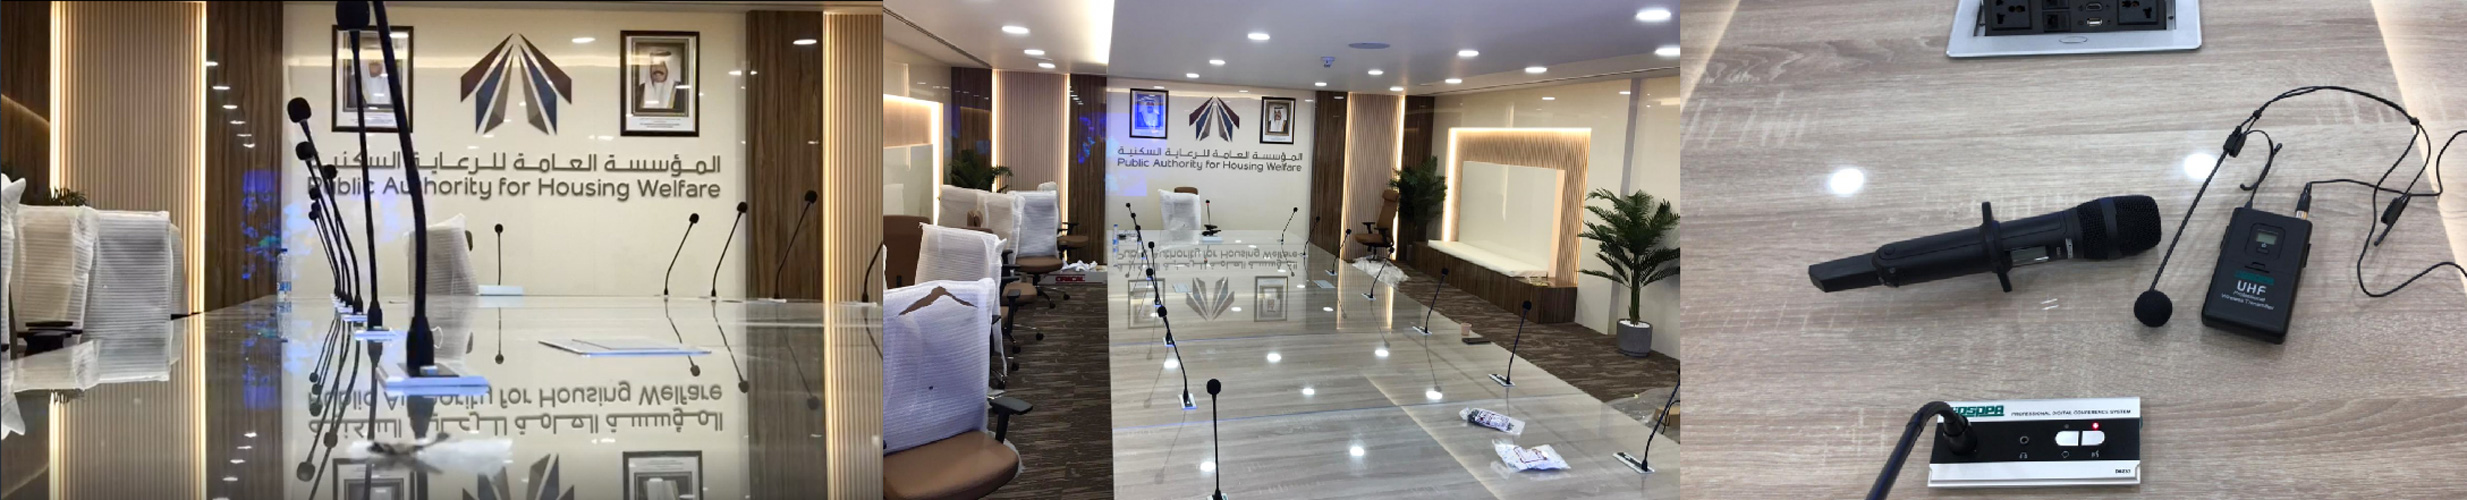 digital-conference-system-for-pahw-in-kuwait-5.jpg